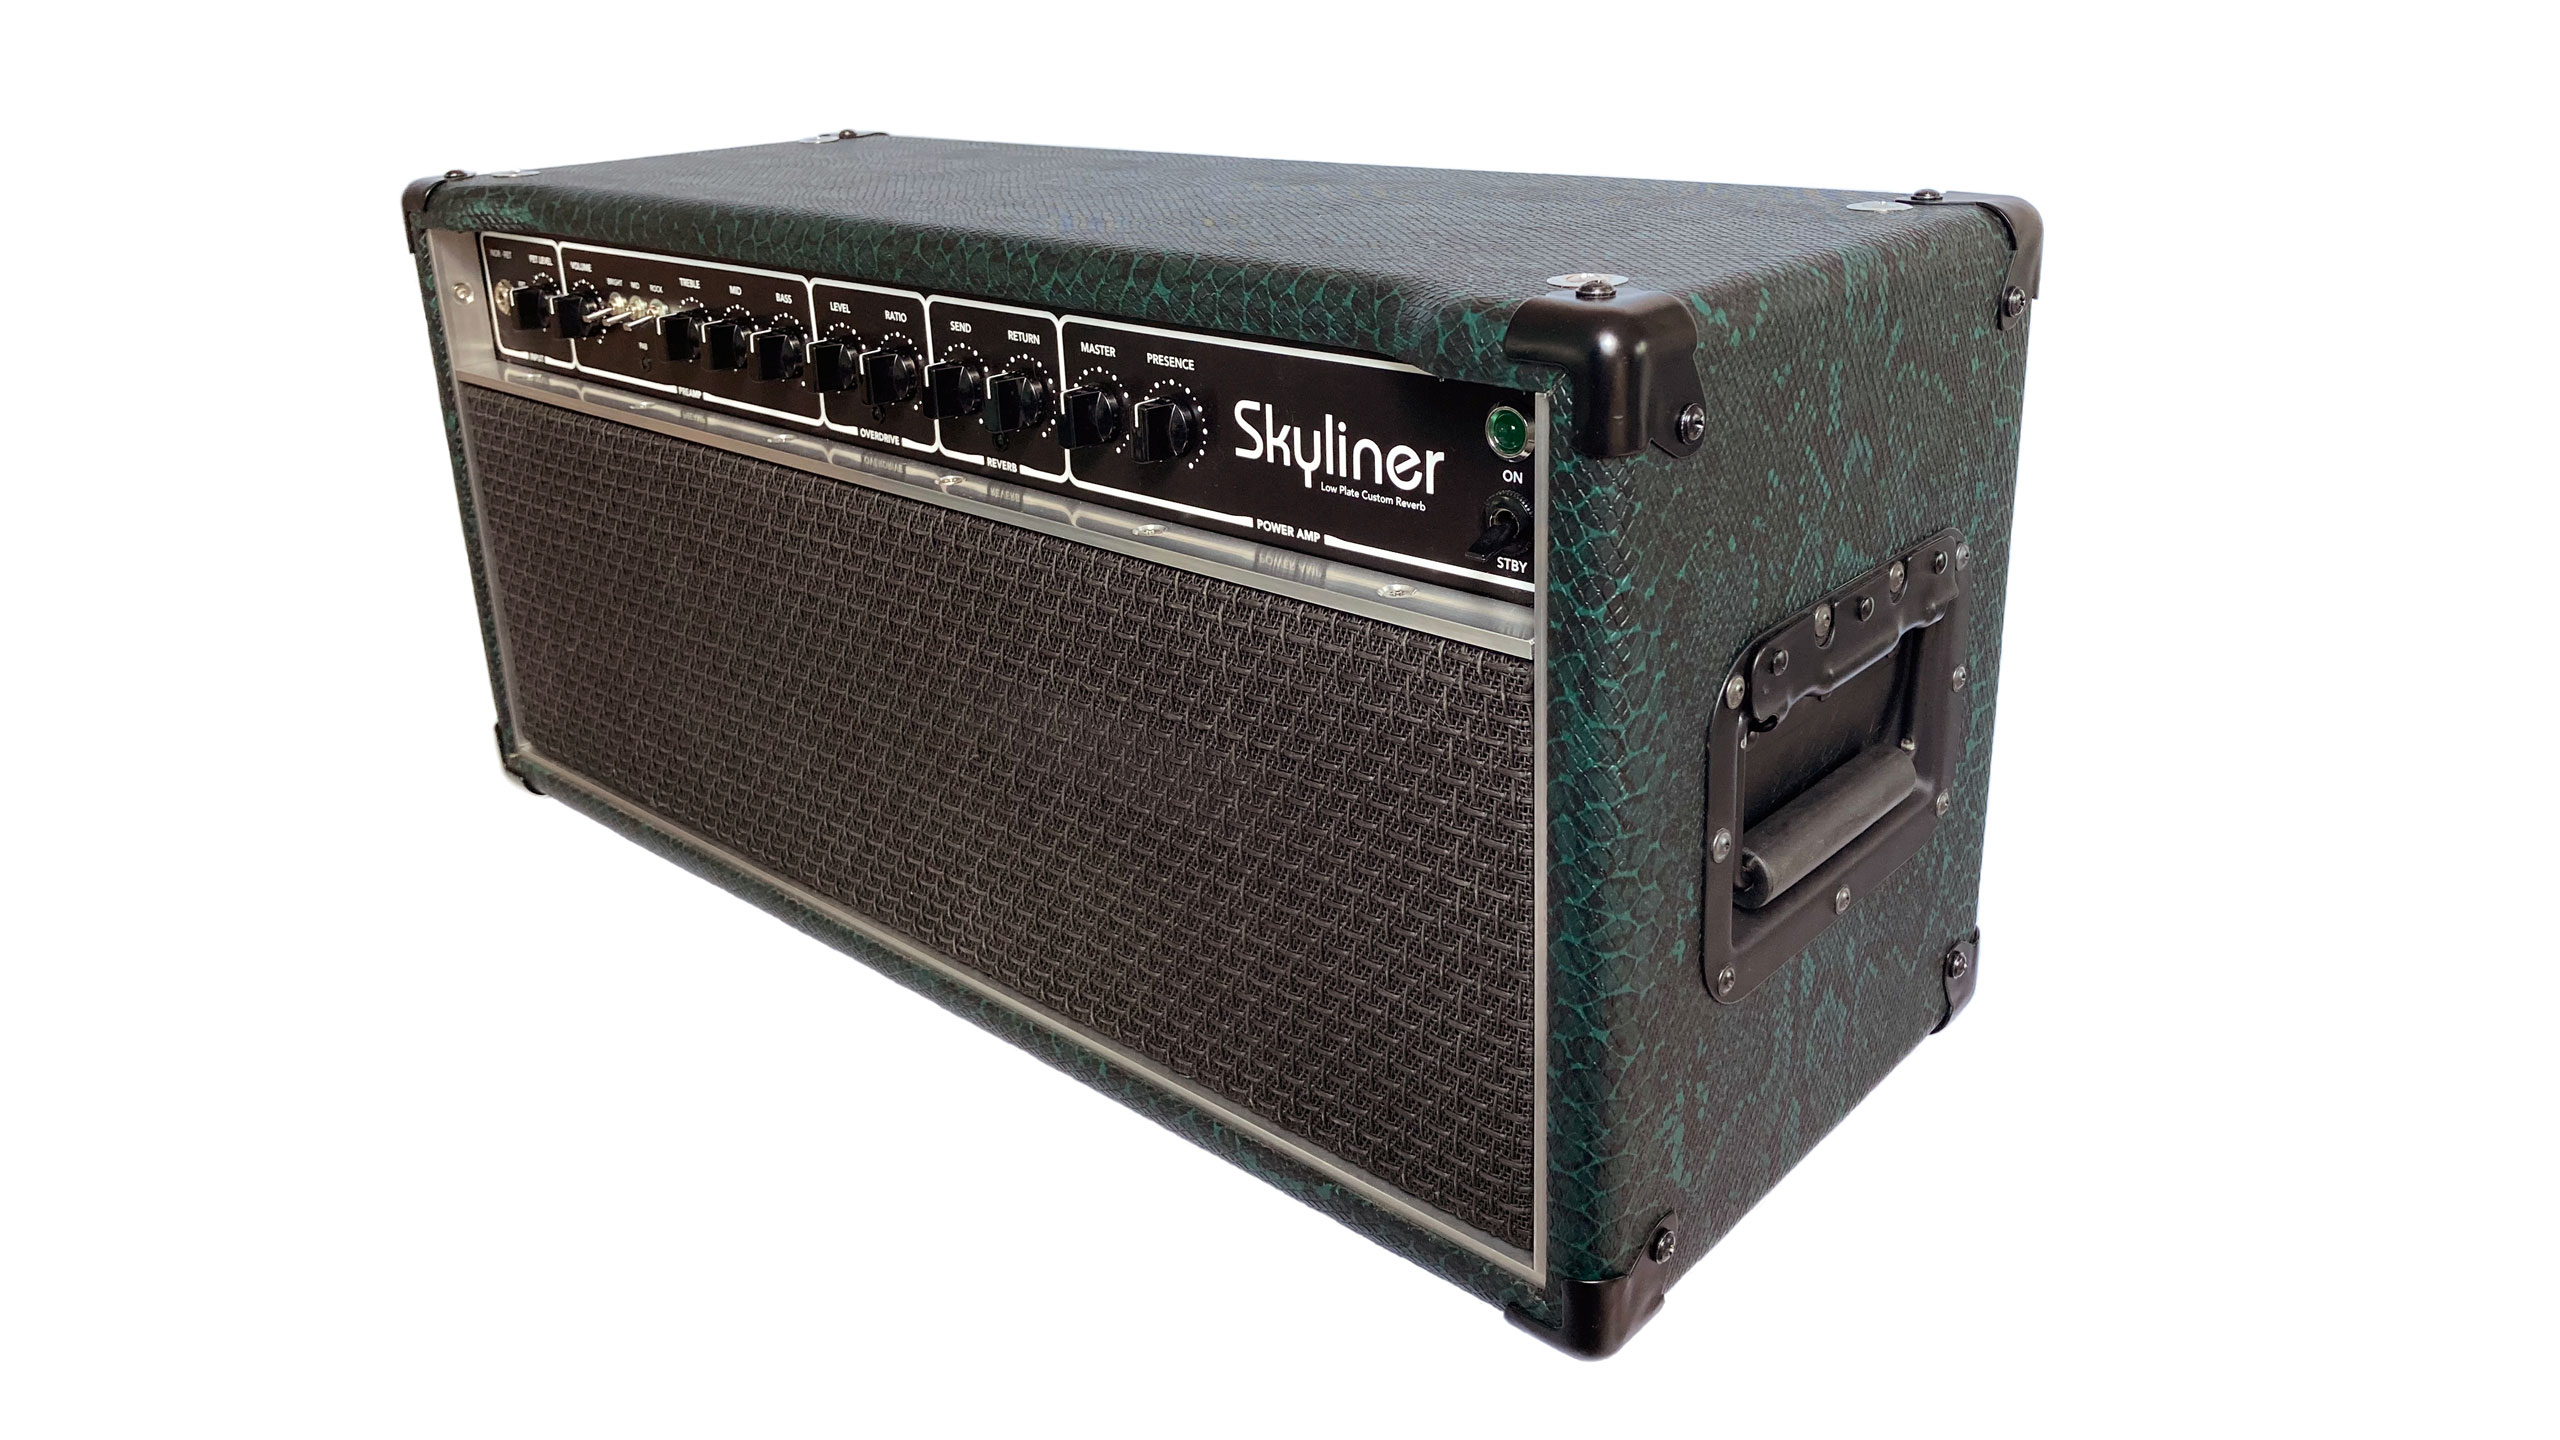 Skyliner guitar amp - right front low